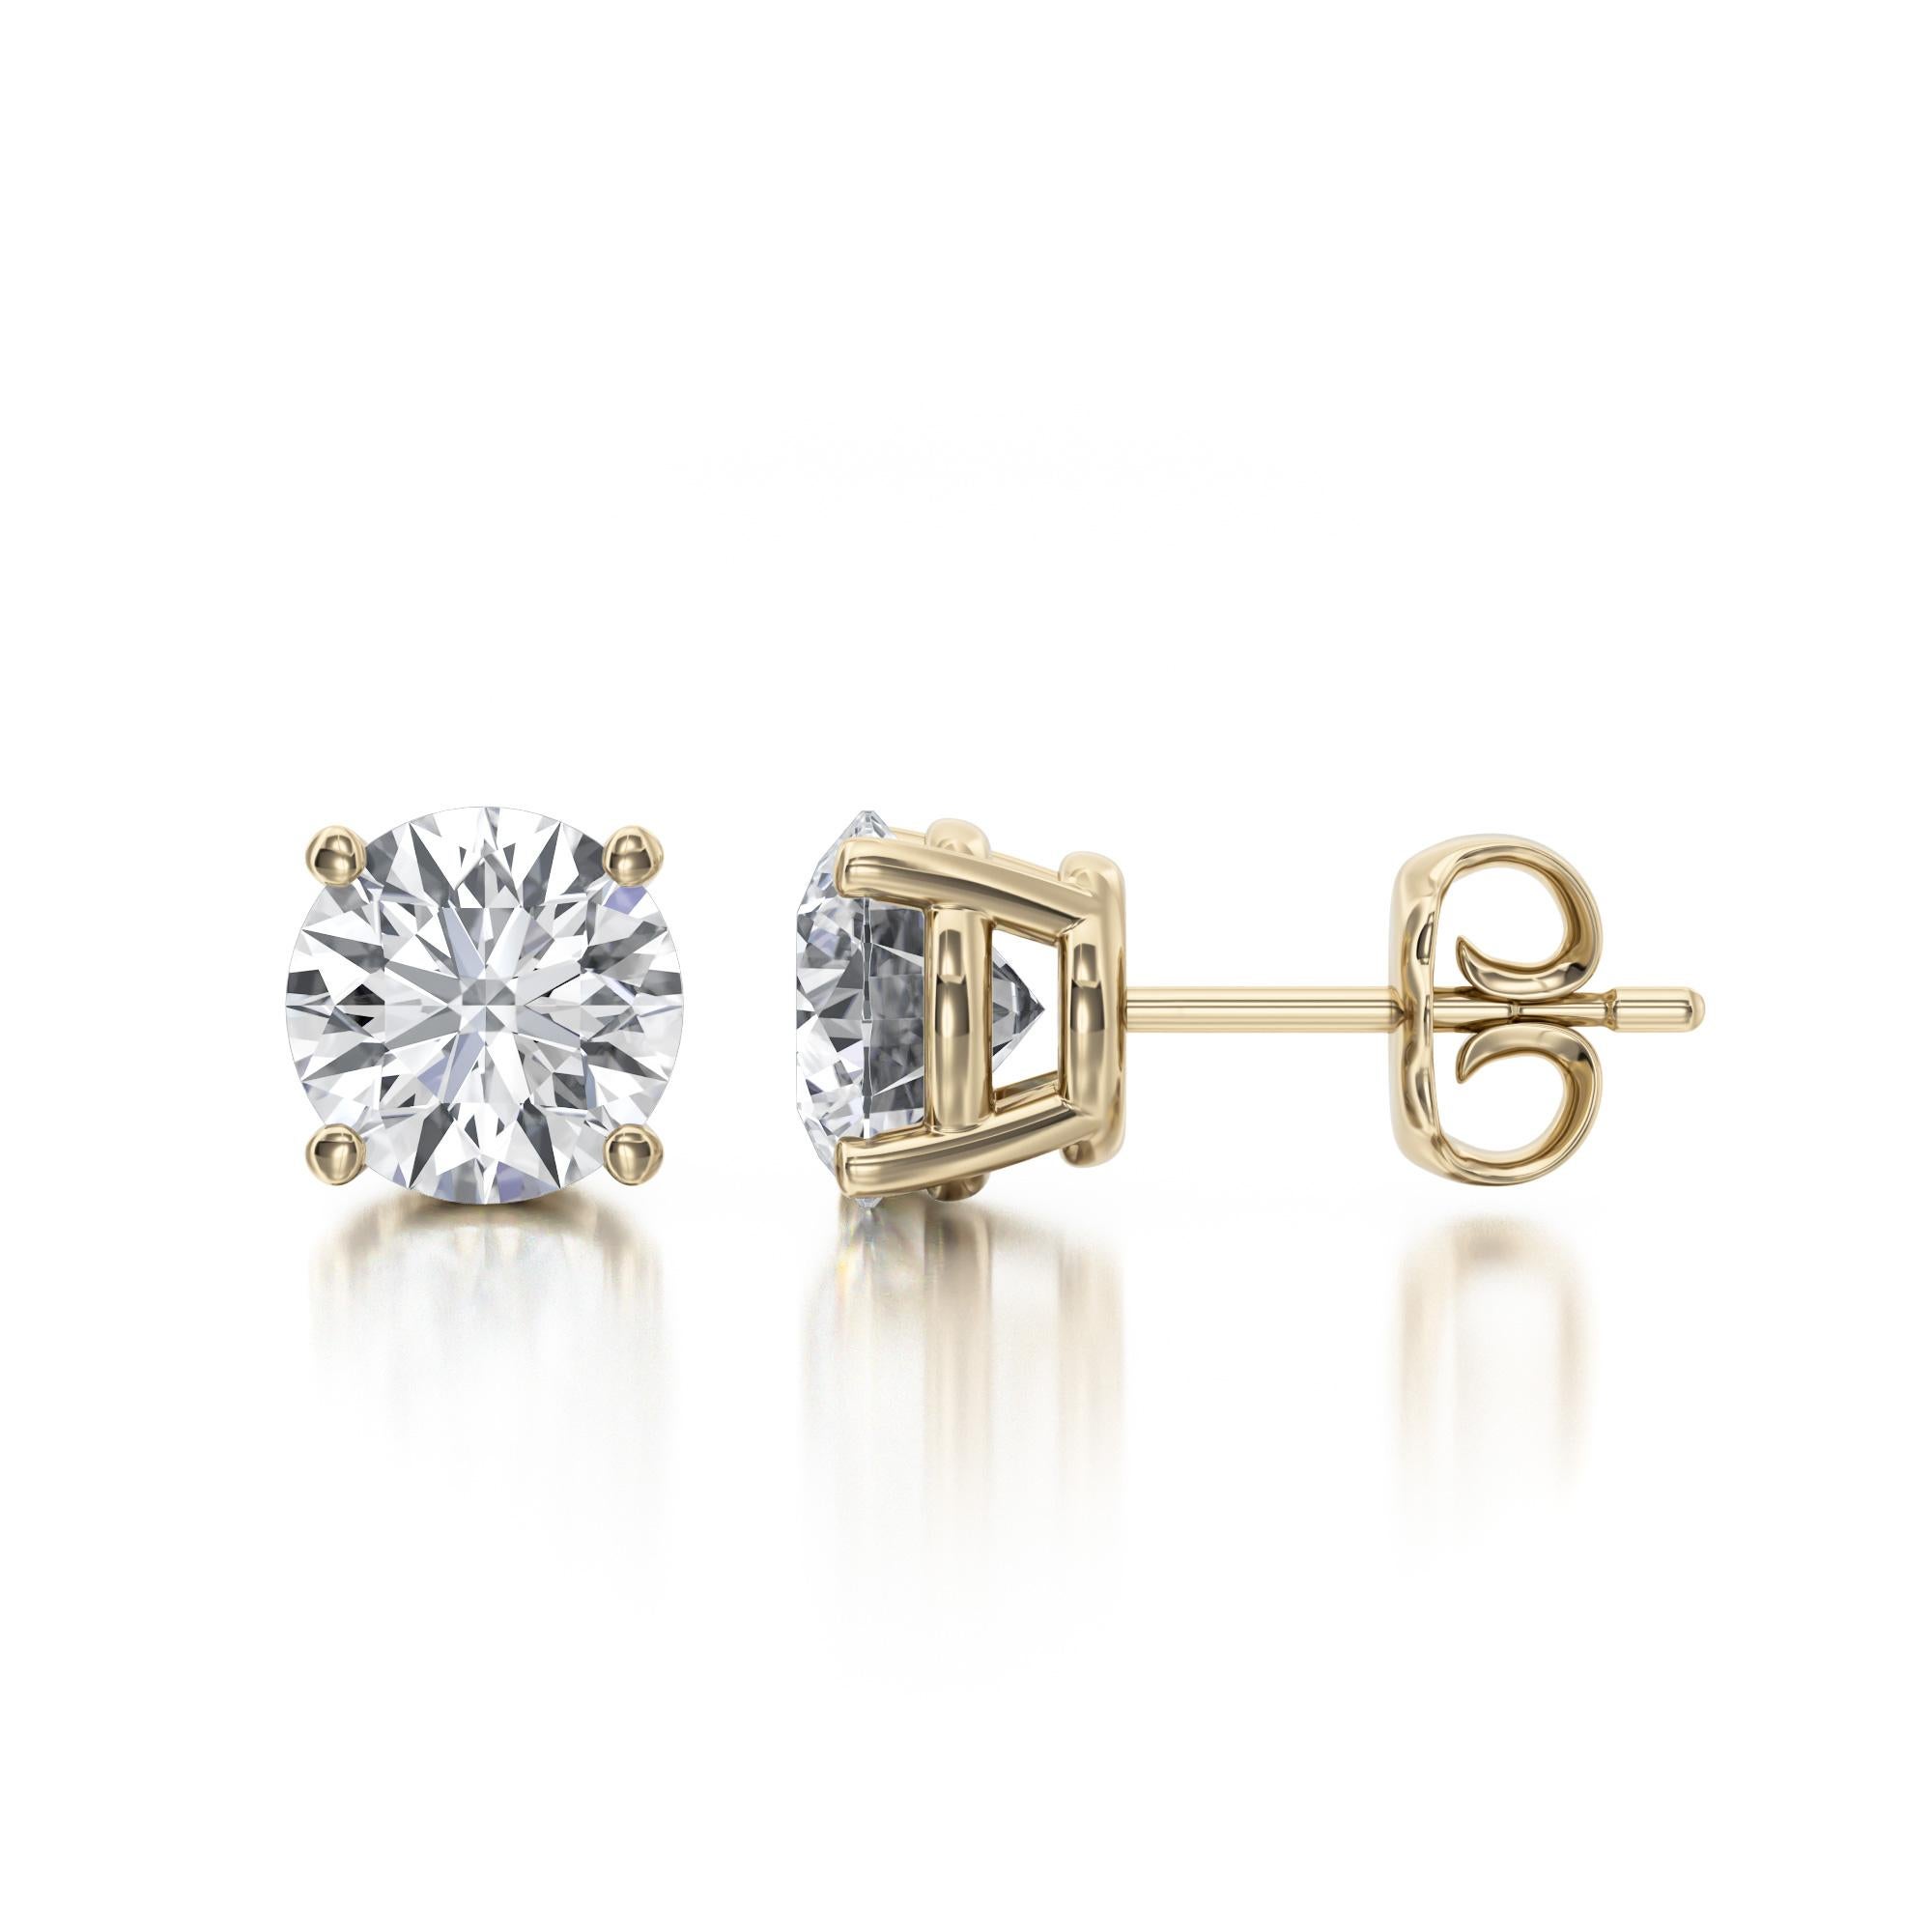 Contemporary 1.50 TCW Four Prong Diamond Stud Earrings 18K Yellow Gold